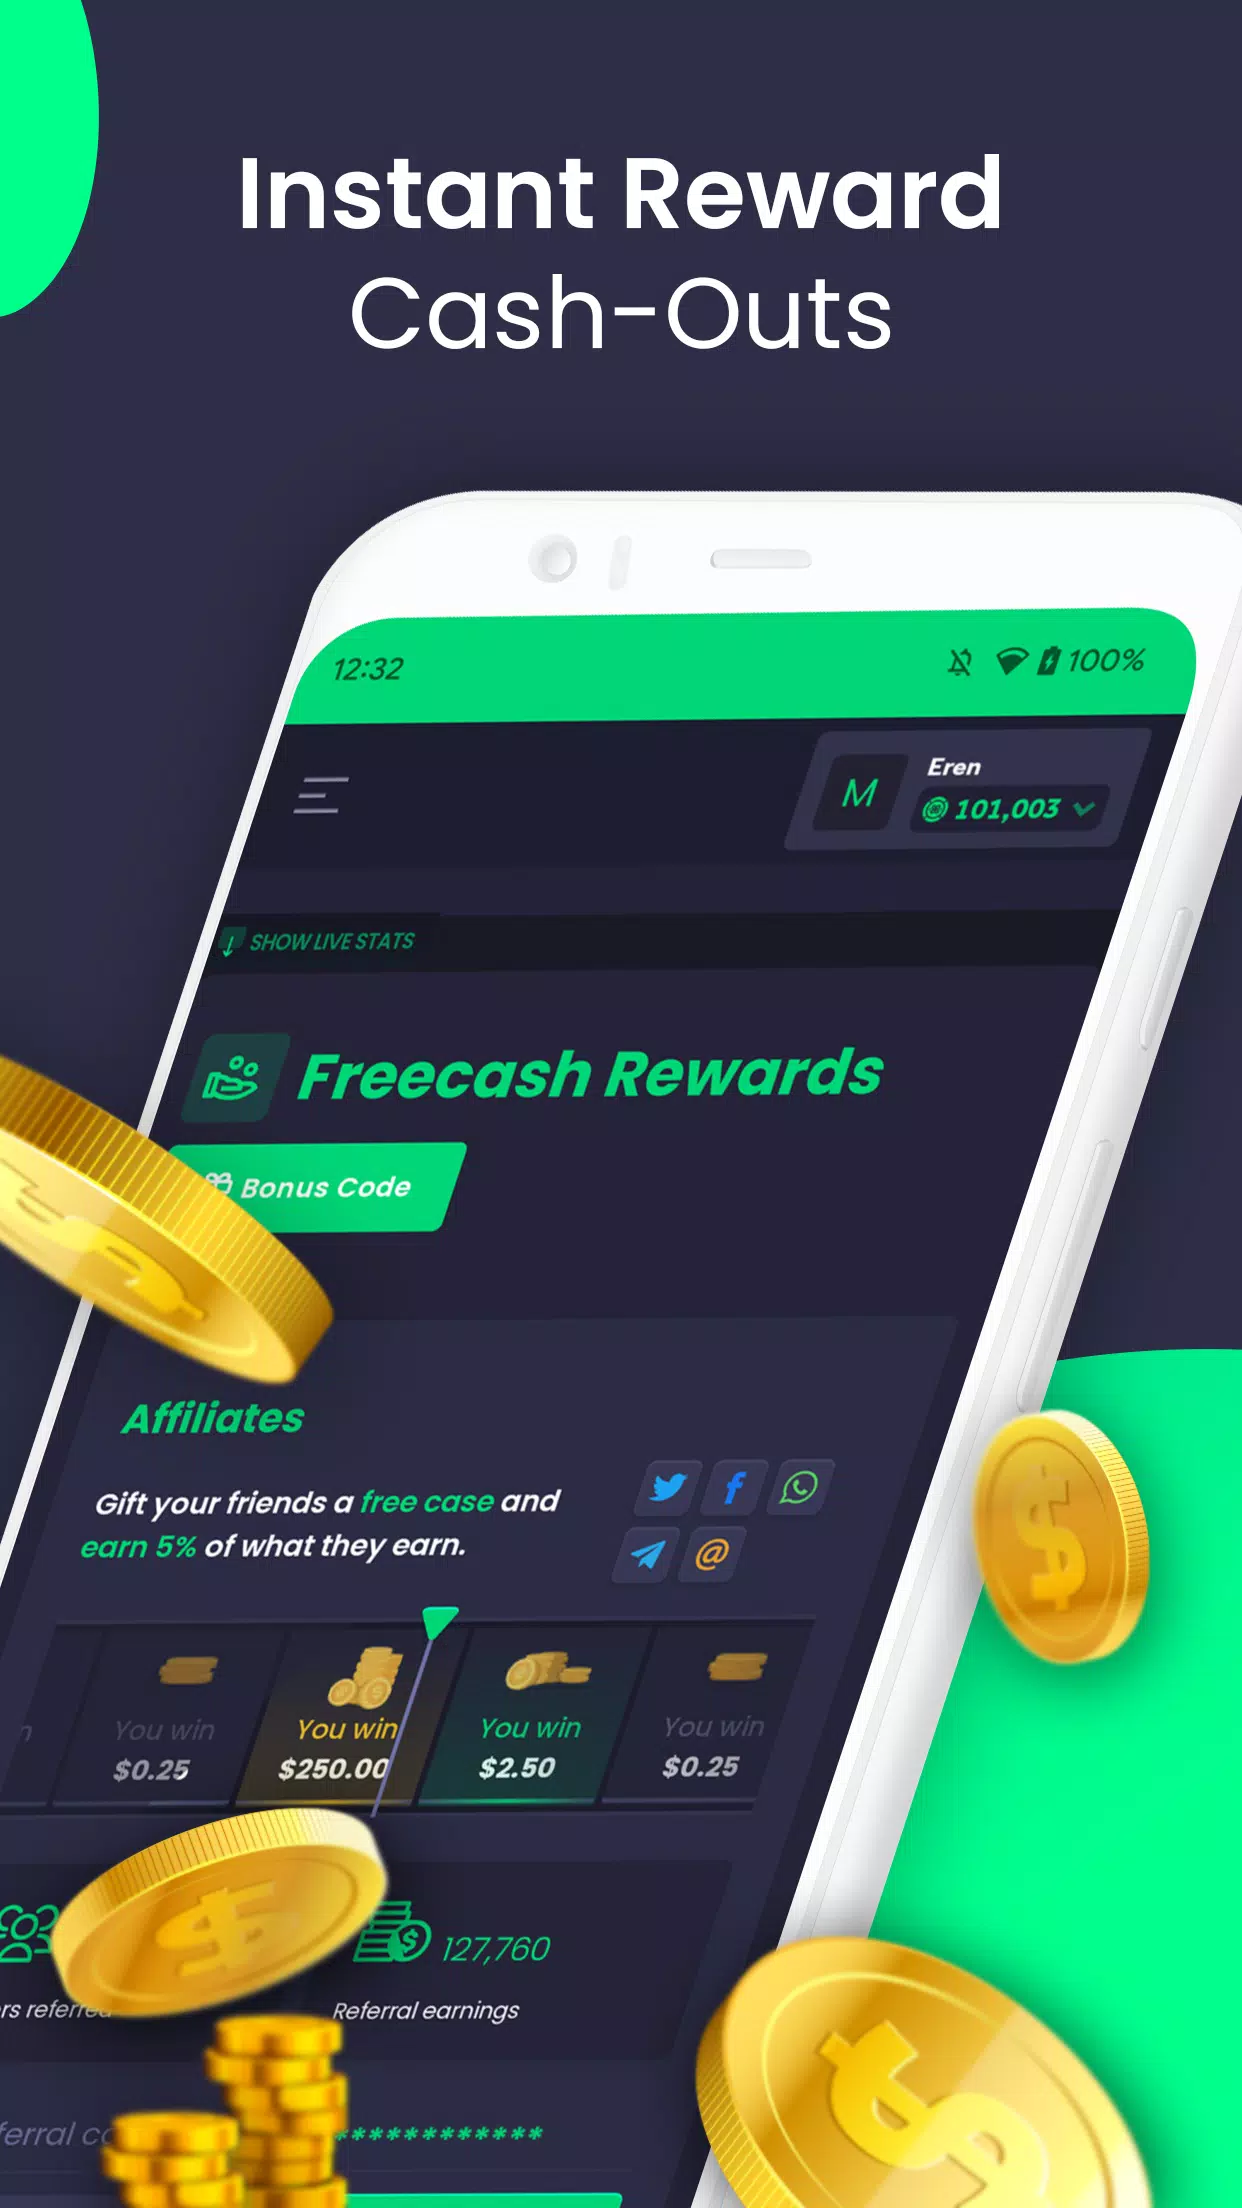 Fortreeses cash APK (Android App) - Free Download